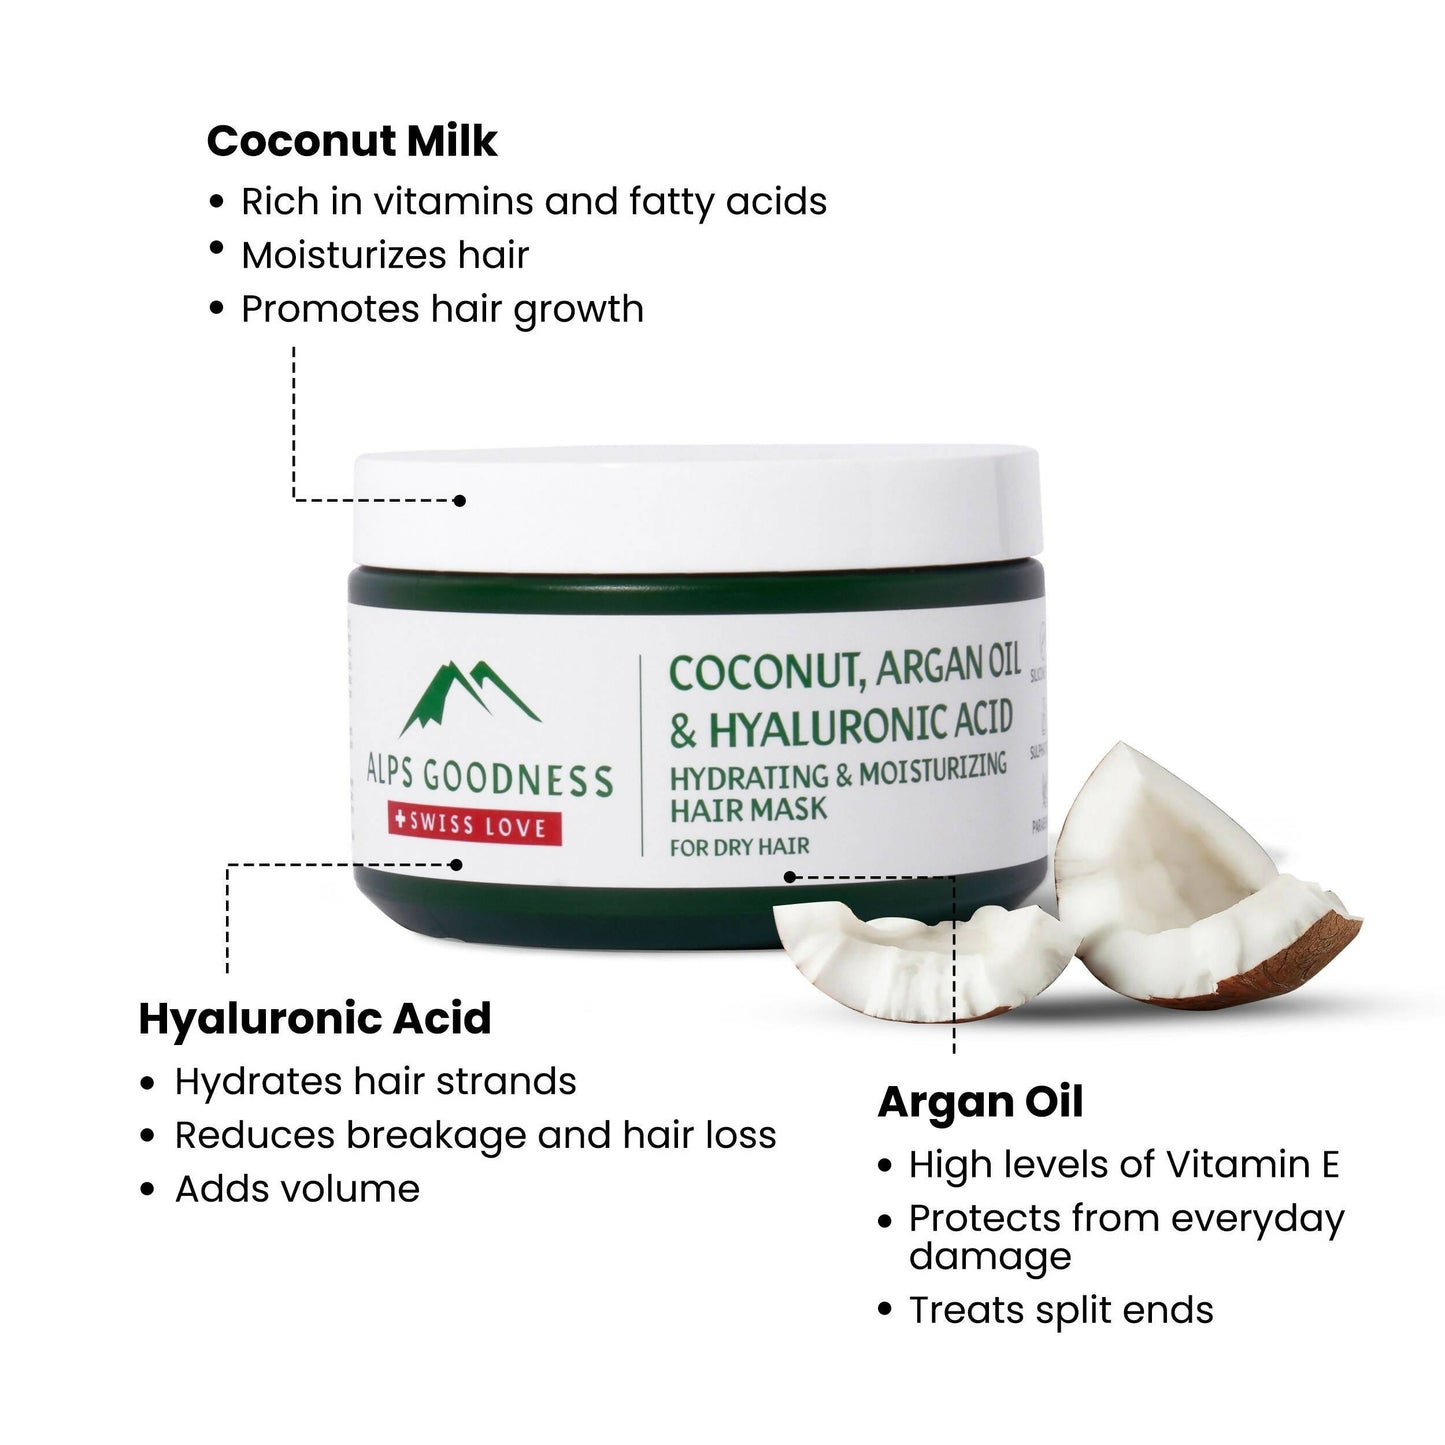 Alps Goodness Coconut Milk, Argan Oil and Hyaluronic Acid Hydrating and Nourishing Hair Mask